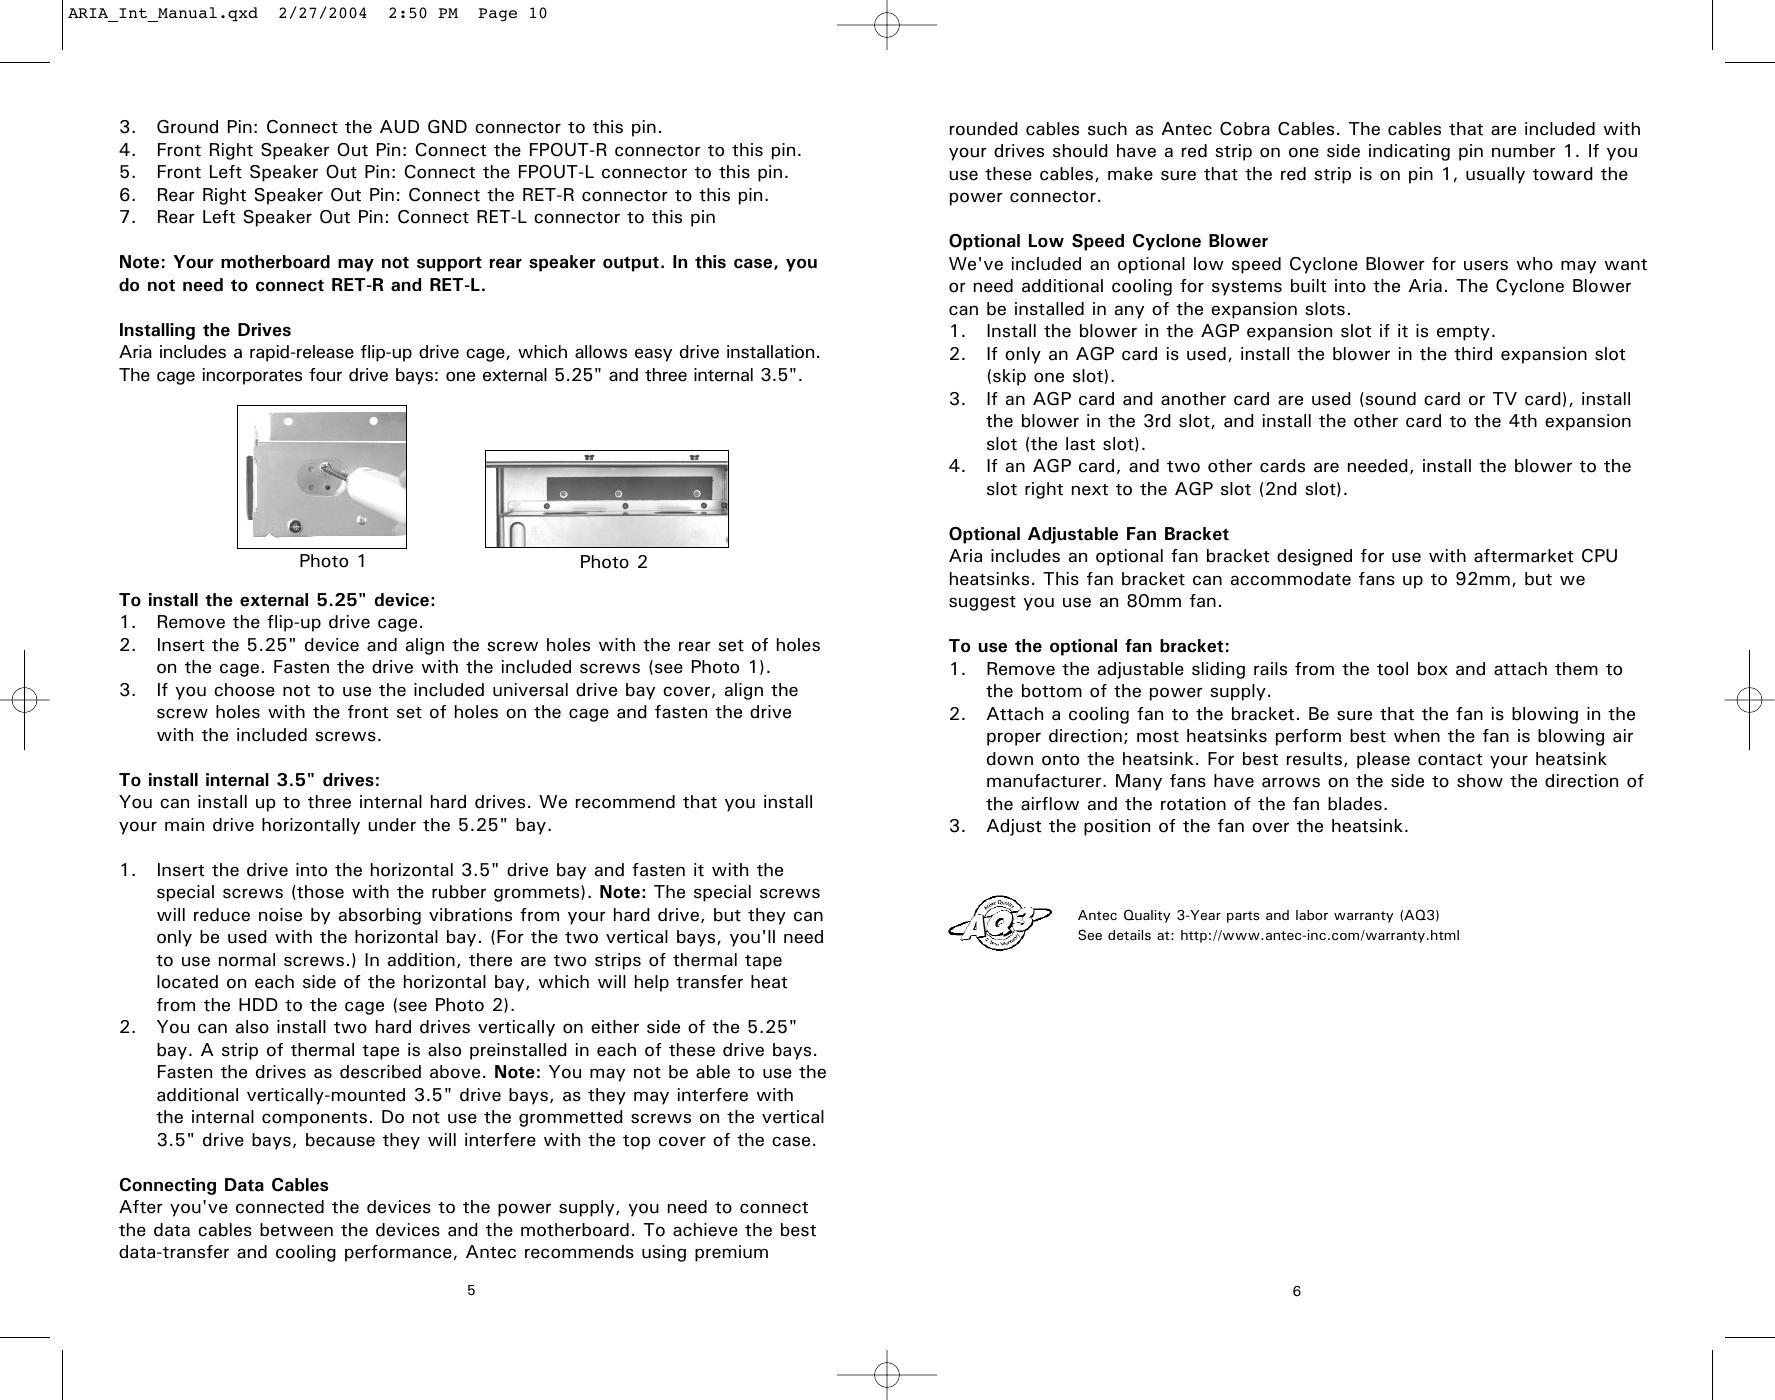 Page 4 of 4 - Antec Antec-Ar300-Users-Manual- ARIA_Int_Manual  Antec-ar300-users-manual